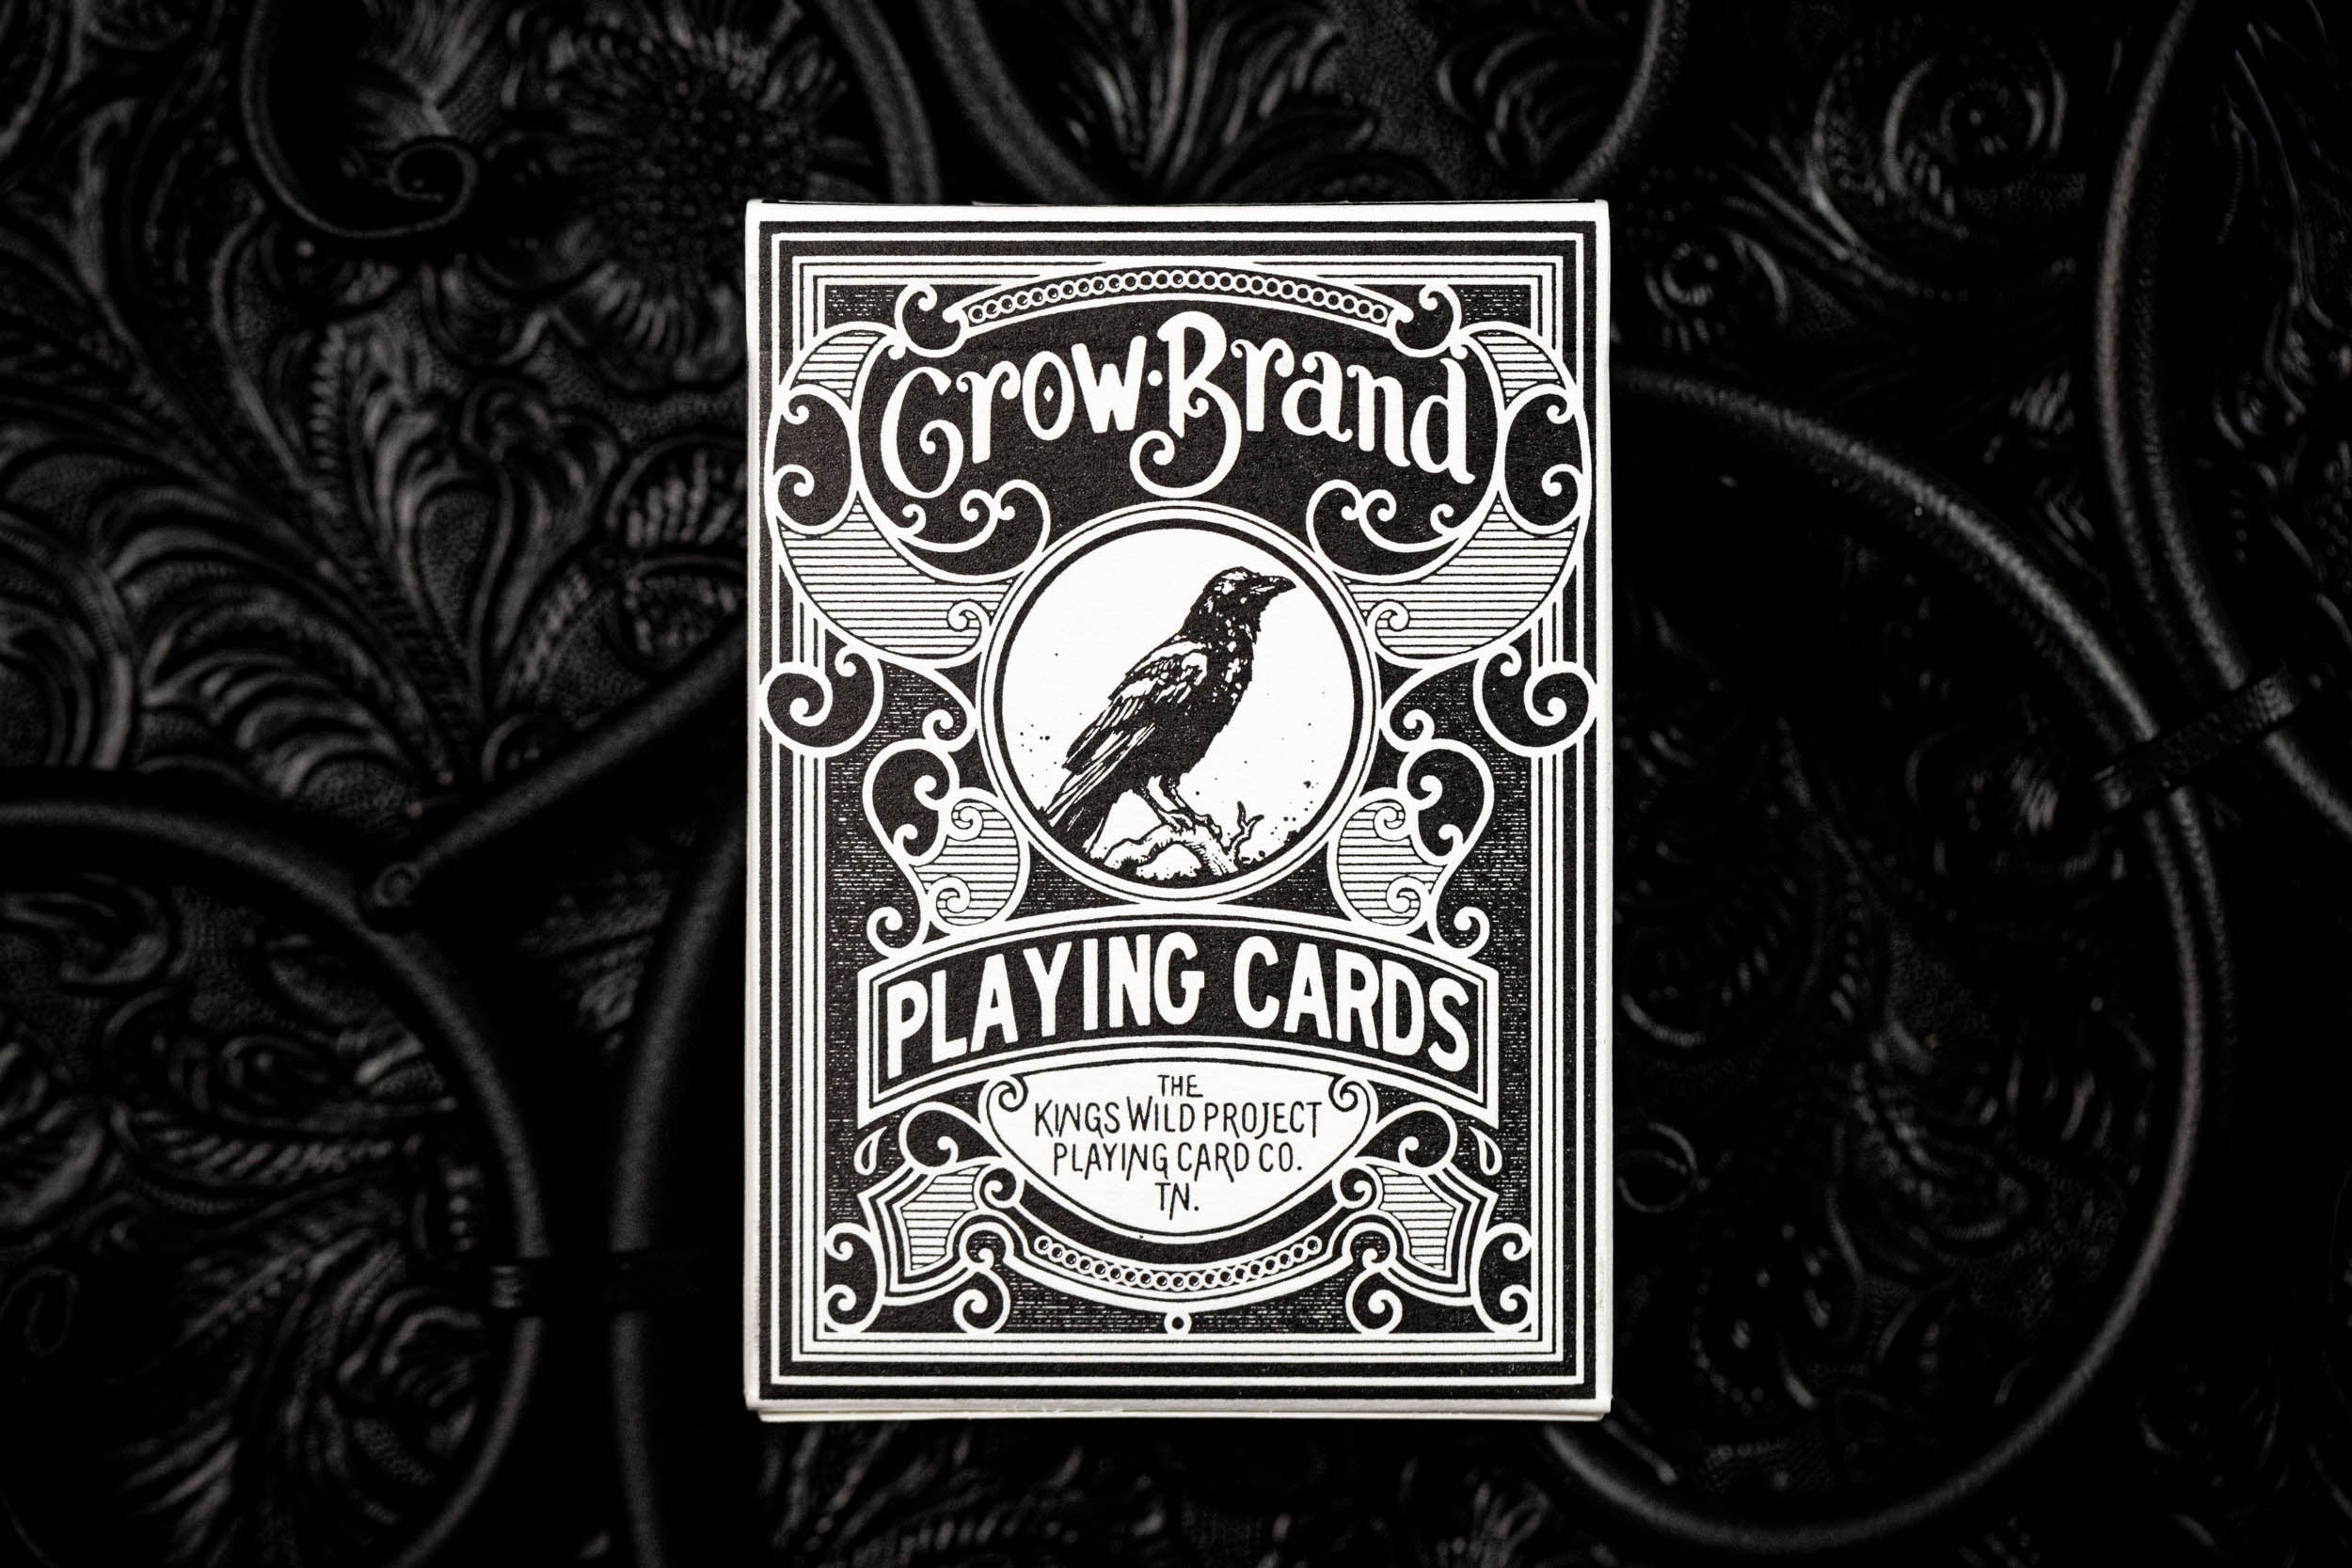 Crow Brand Limited Edition Luxury Playing Cards